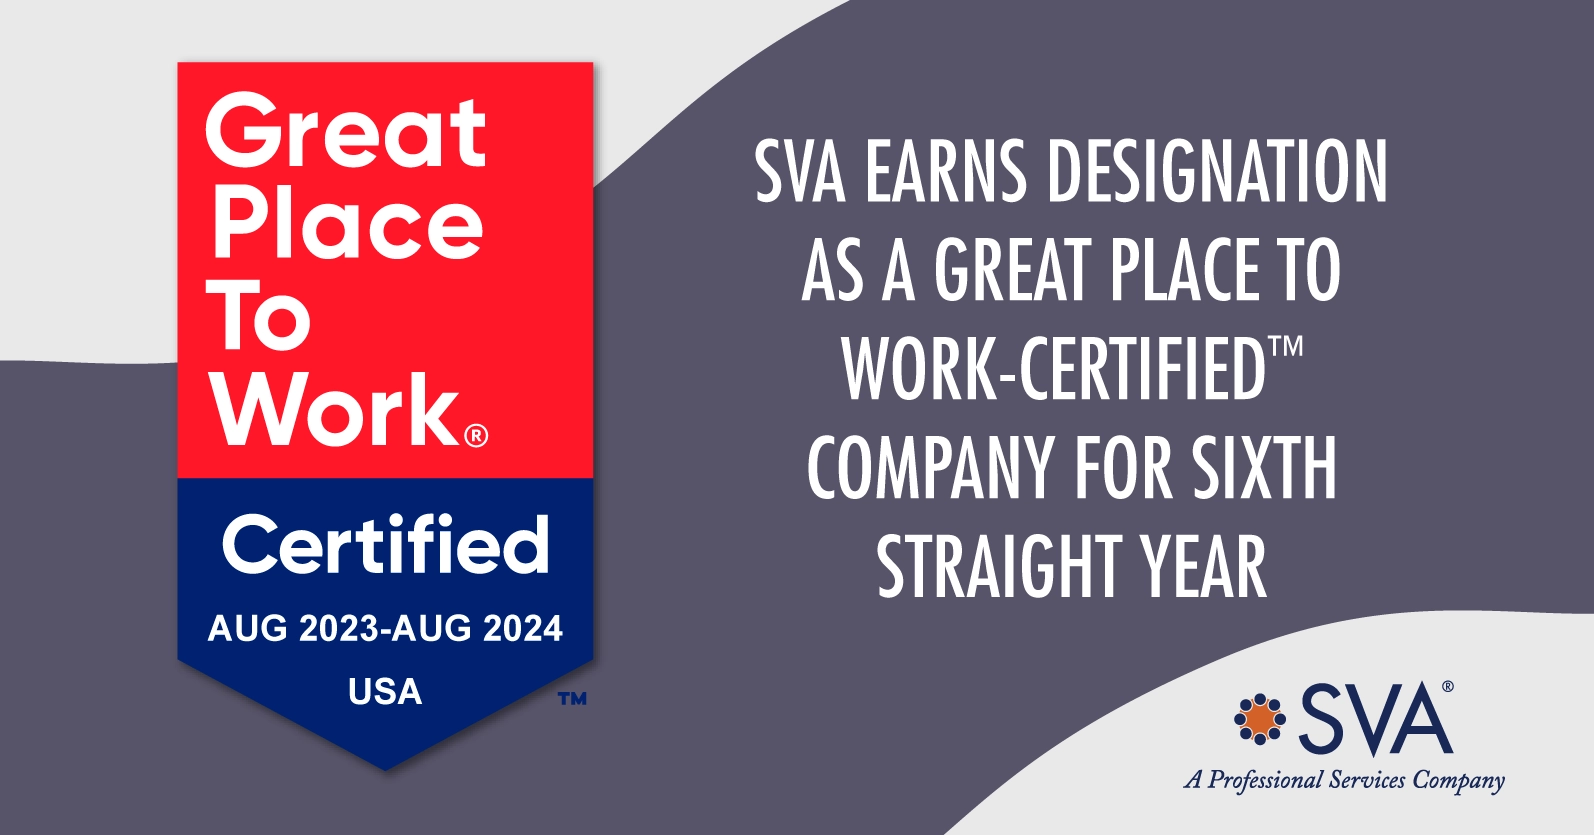 SVA Certified as a Great Place To Work® For Sixth Straight Year